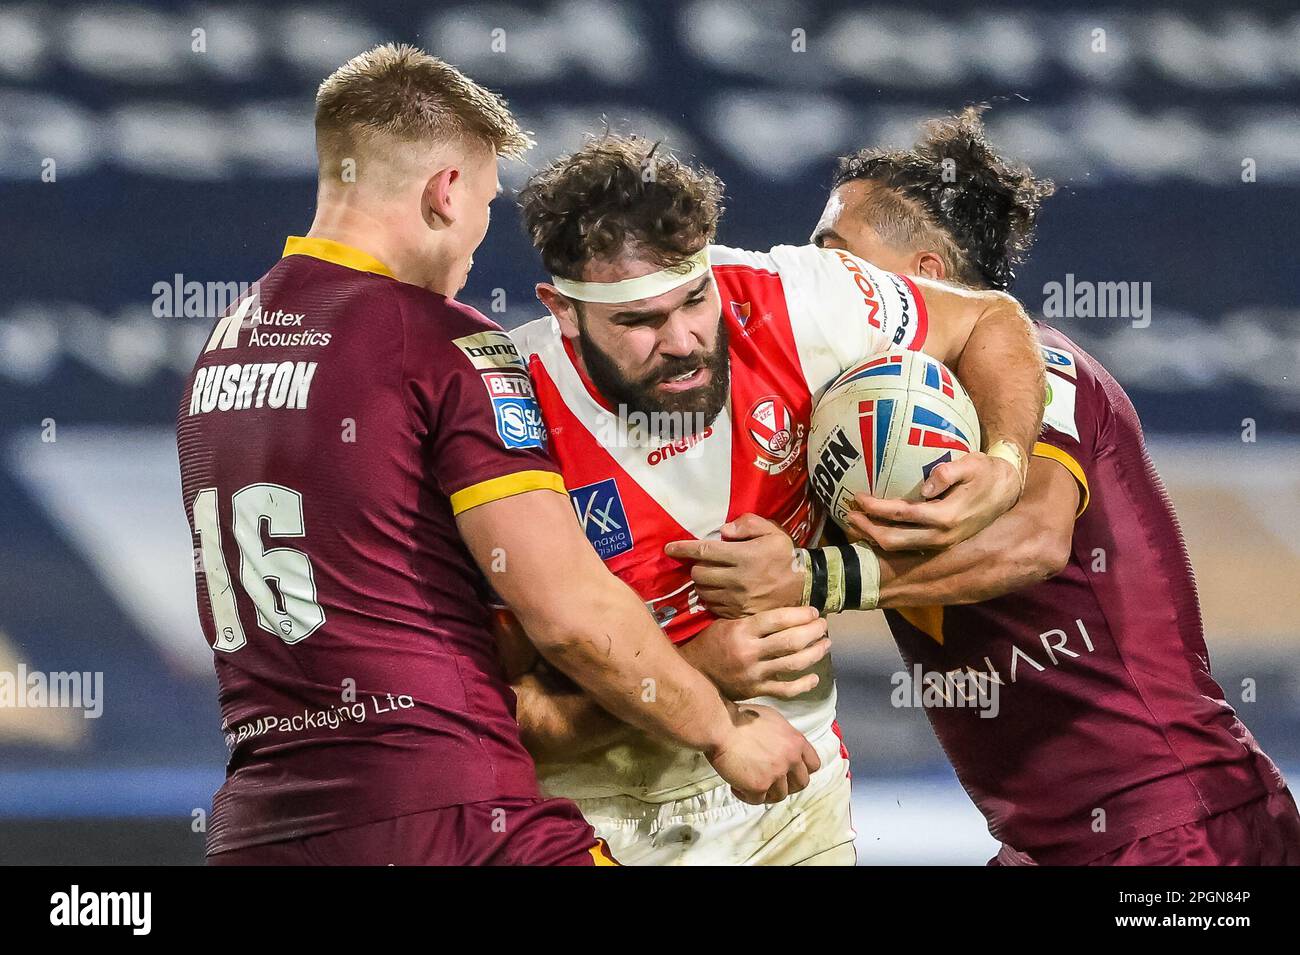 Alex Walmsley #8 of St Helens is tackled by Harry Rushton #16 and Ashton Golding #14 of Huddersfield Giants during the Betfred Super League Round 6 match Huddersfield Giants vs St Helens at John Smith's Stadium, Huddersfield, United Kingdom, 23rd March 2023  (Photo by Craig Thomas/News Images) Stock Photo